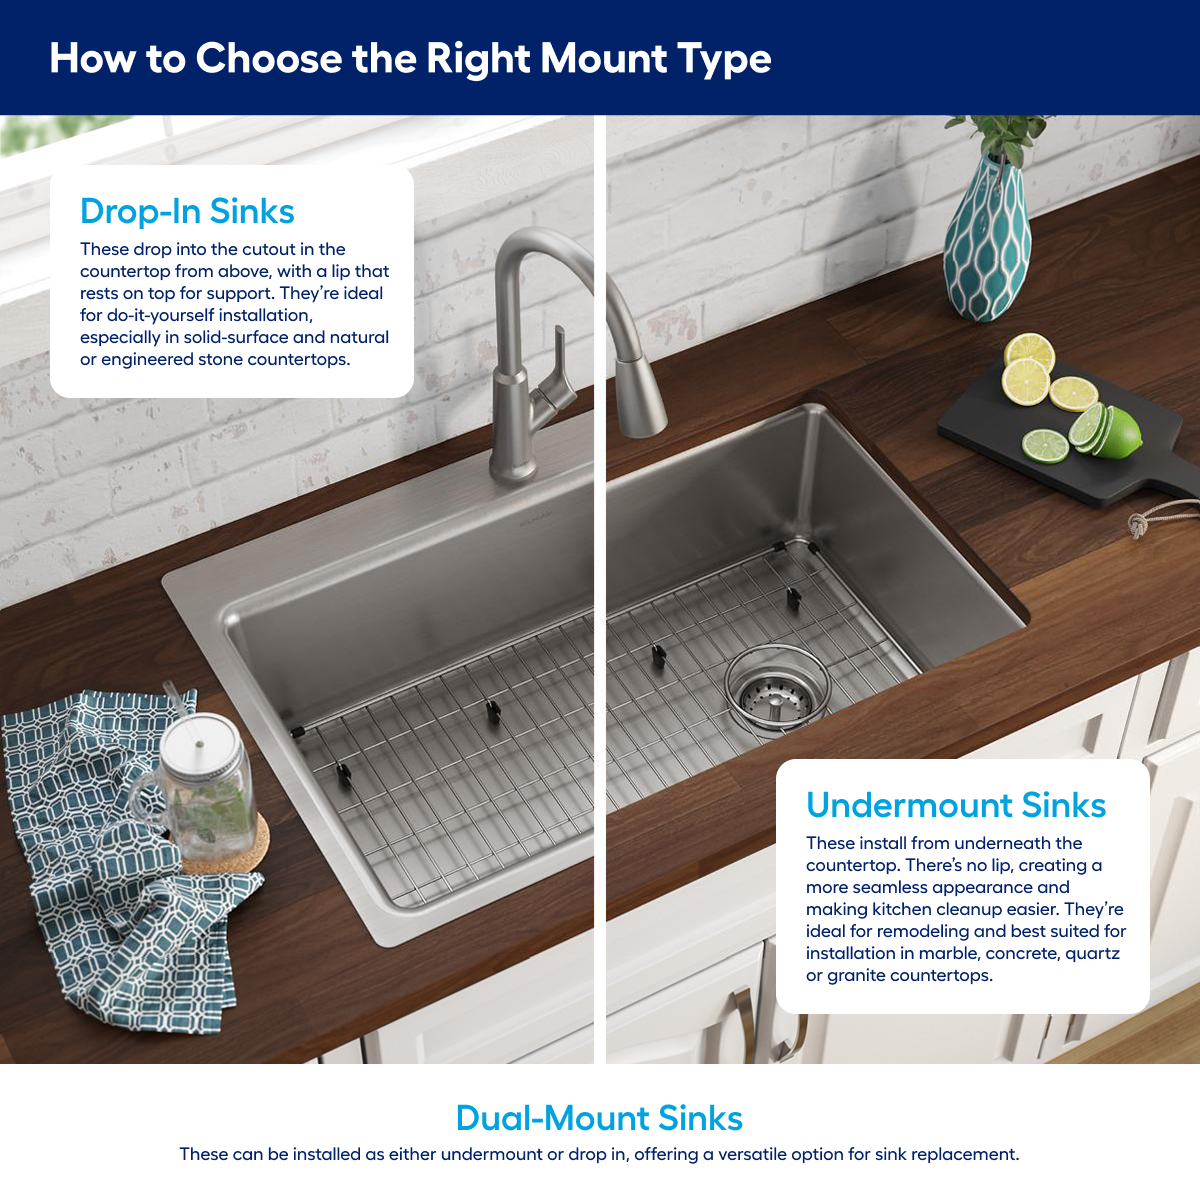 1 or 2 bowl kitchen sink Dawn removable divider--gimick or great idea?